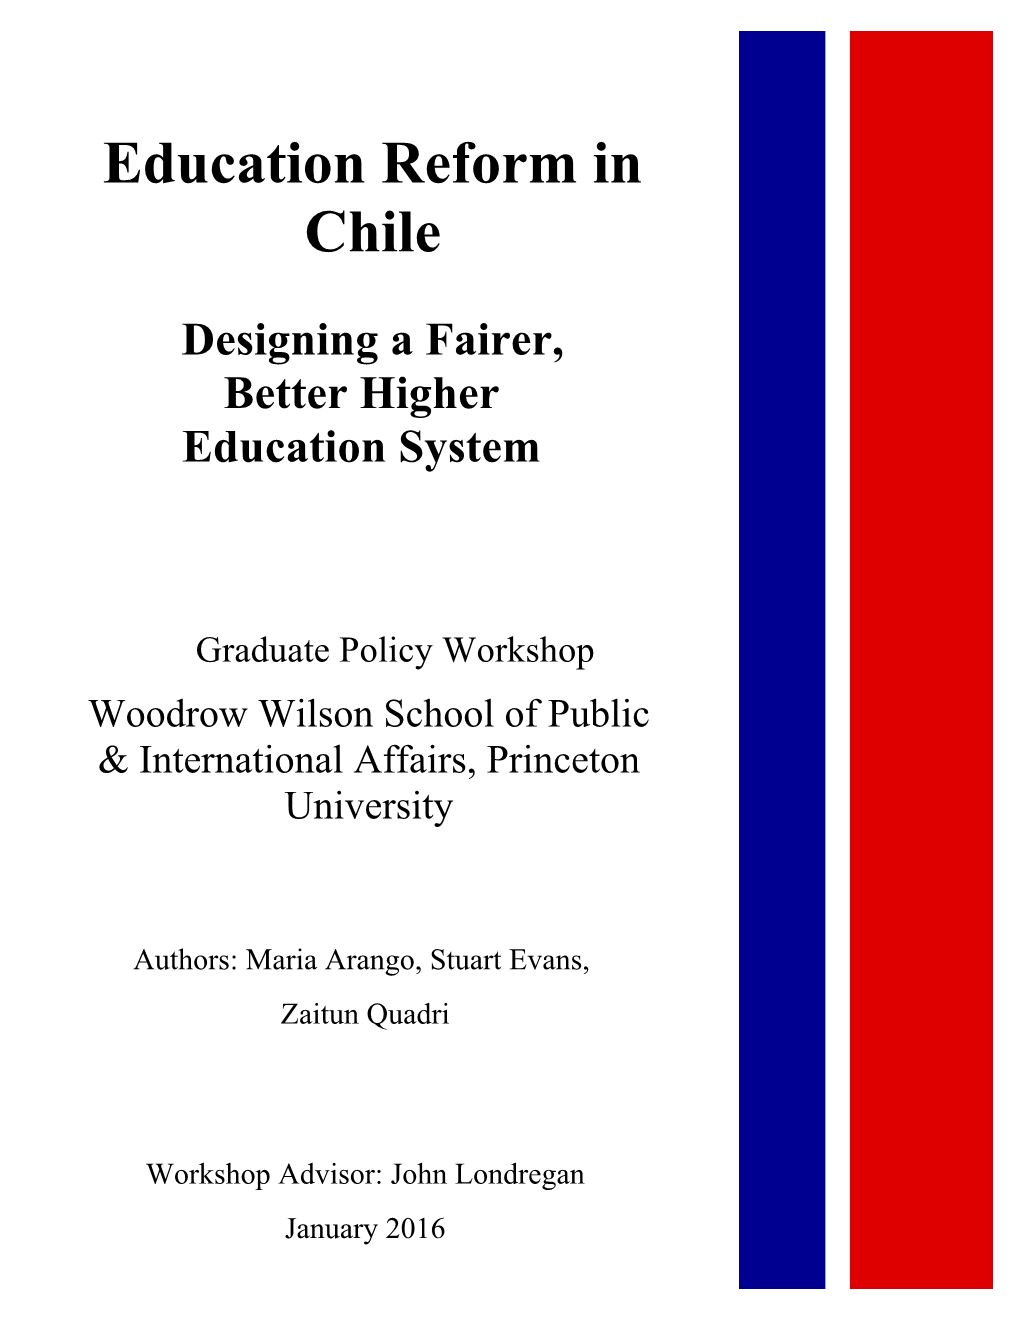 Education Reform in Chile